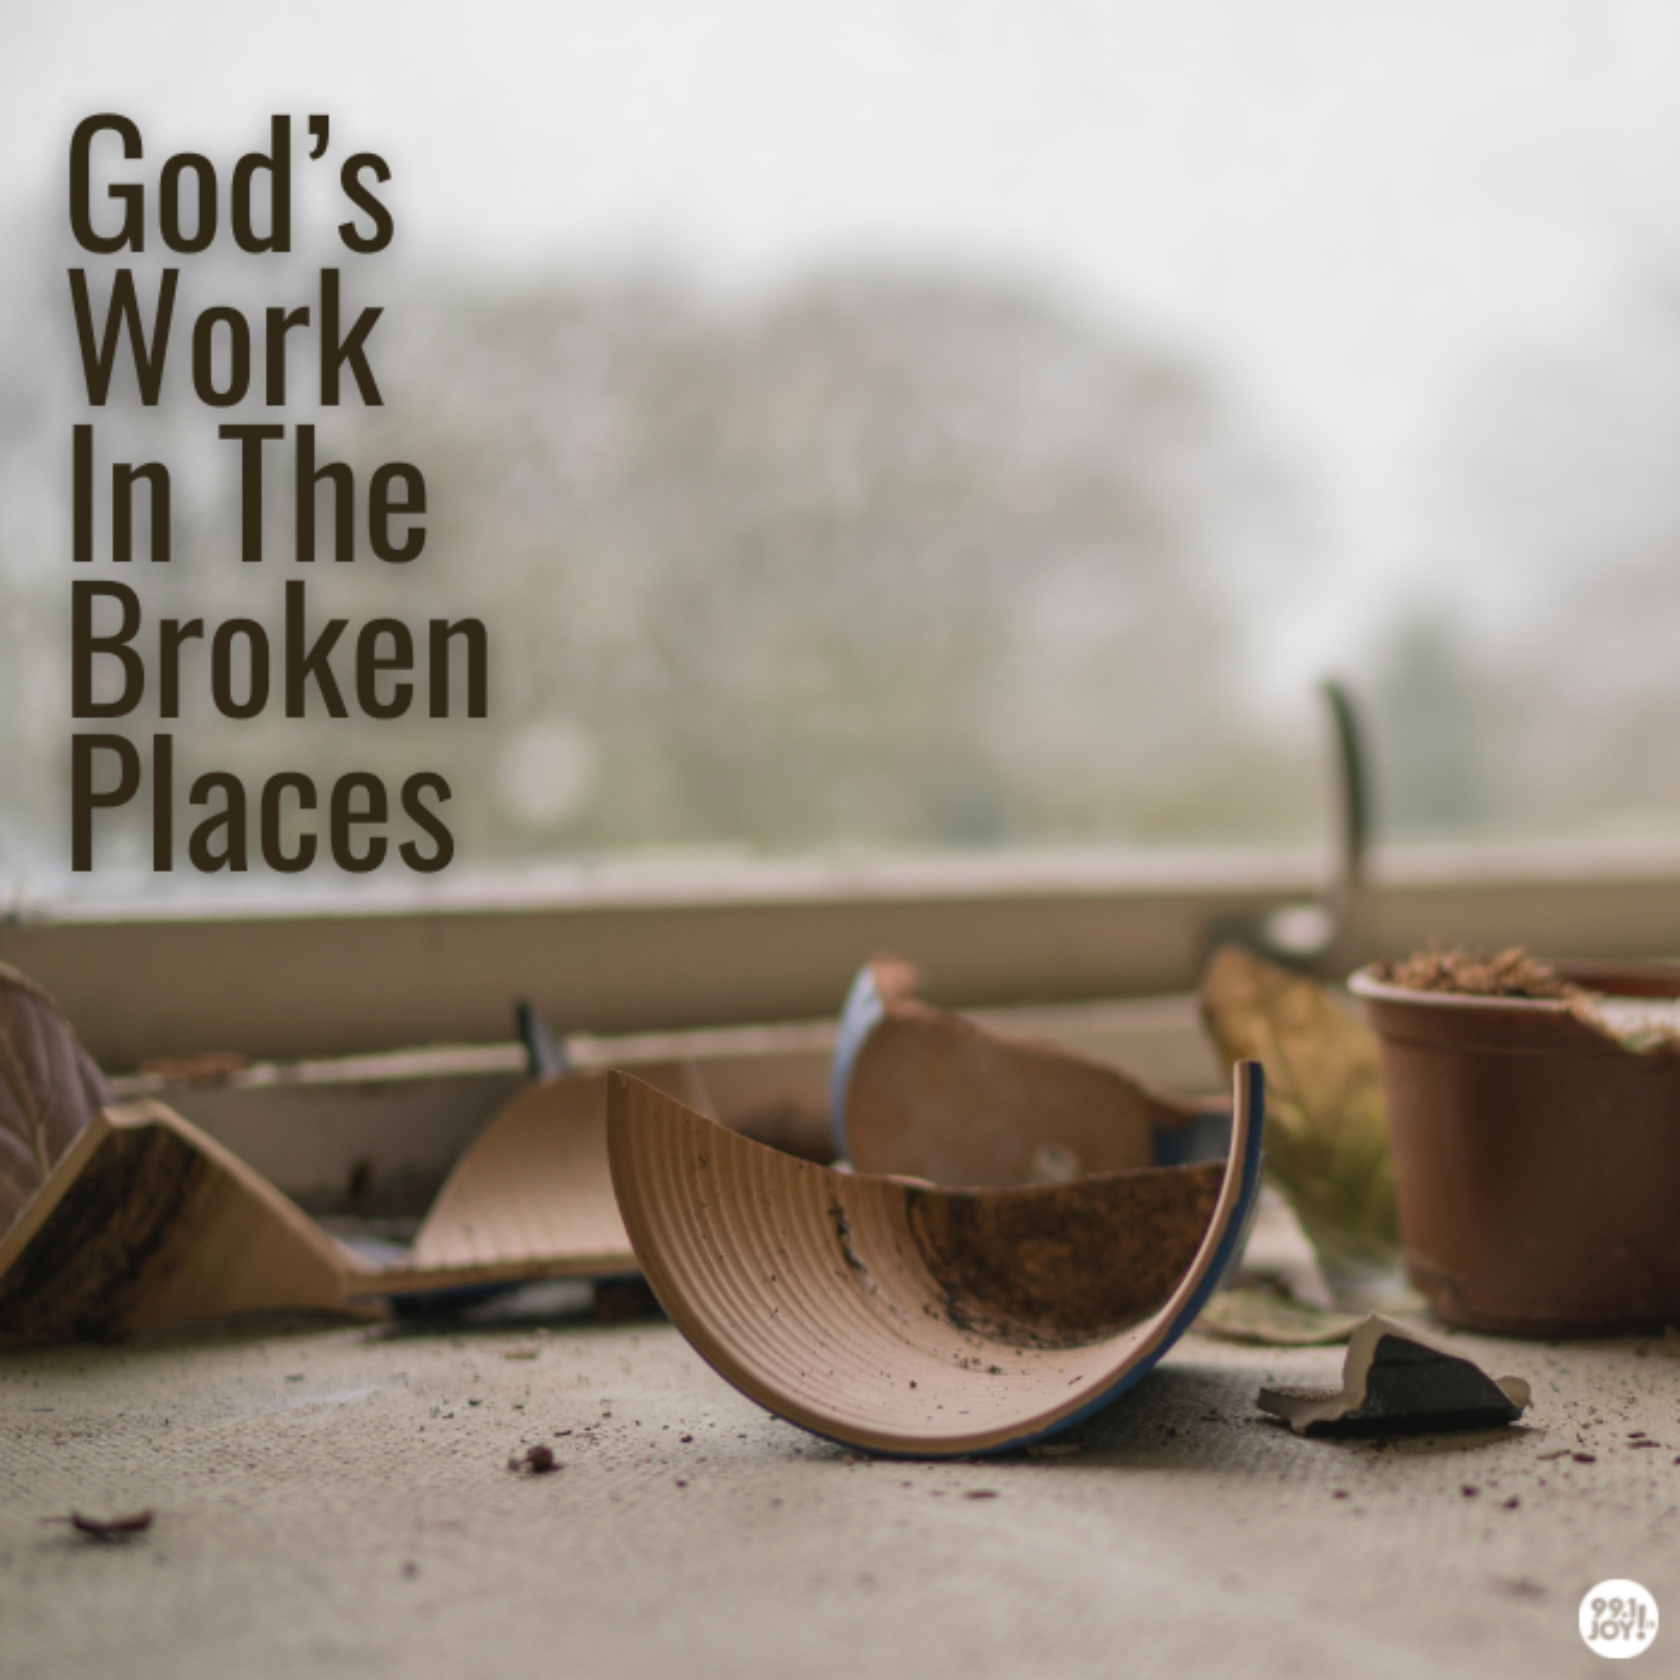 God’s Work In The Broken Places